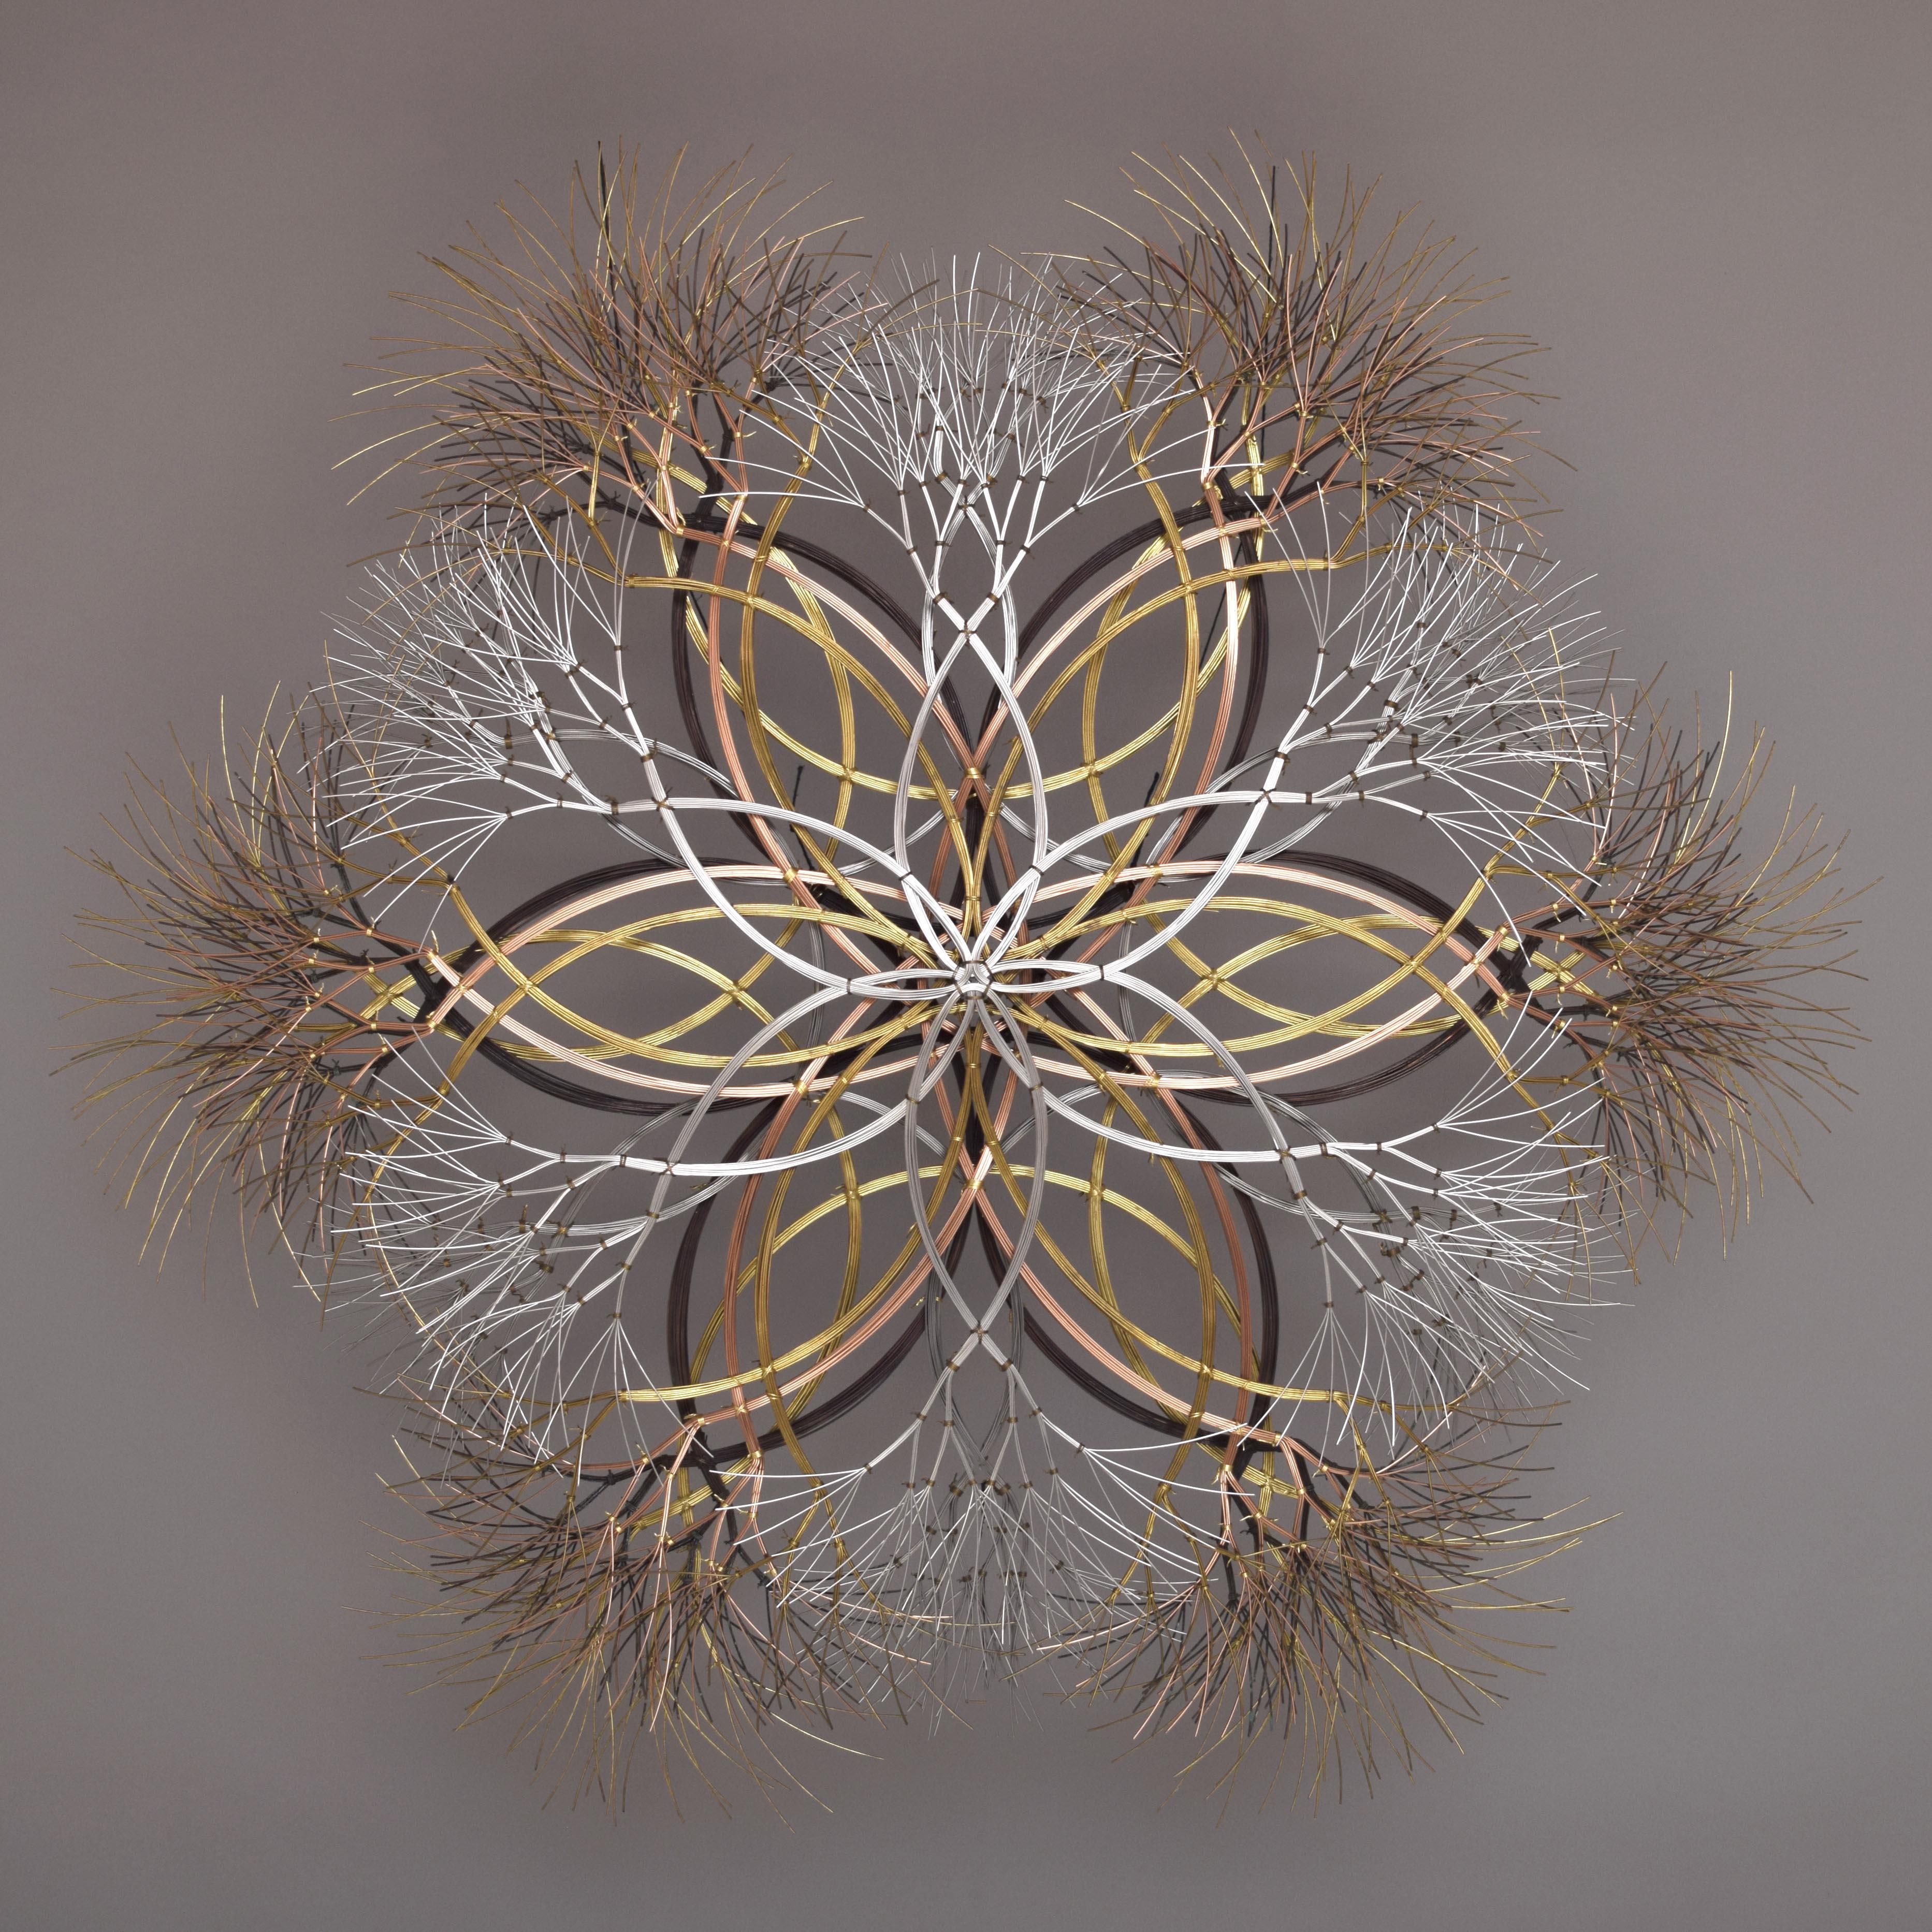 This snowflake sculpture is created using bronze, brass, and stainless steel wire. Kue uses an aesthetic reminiscent of trees, electricity, and light to create sculptures of peace and beauty. Adults and children alike see snowflakes, trees, flowers,